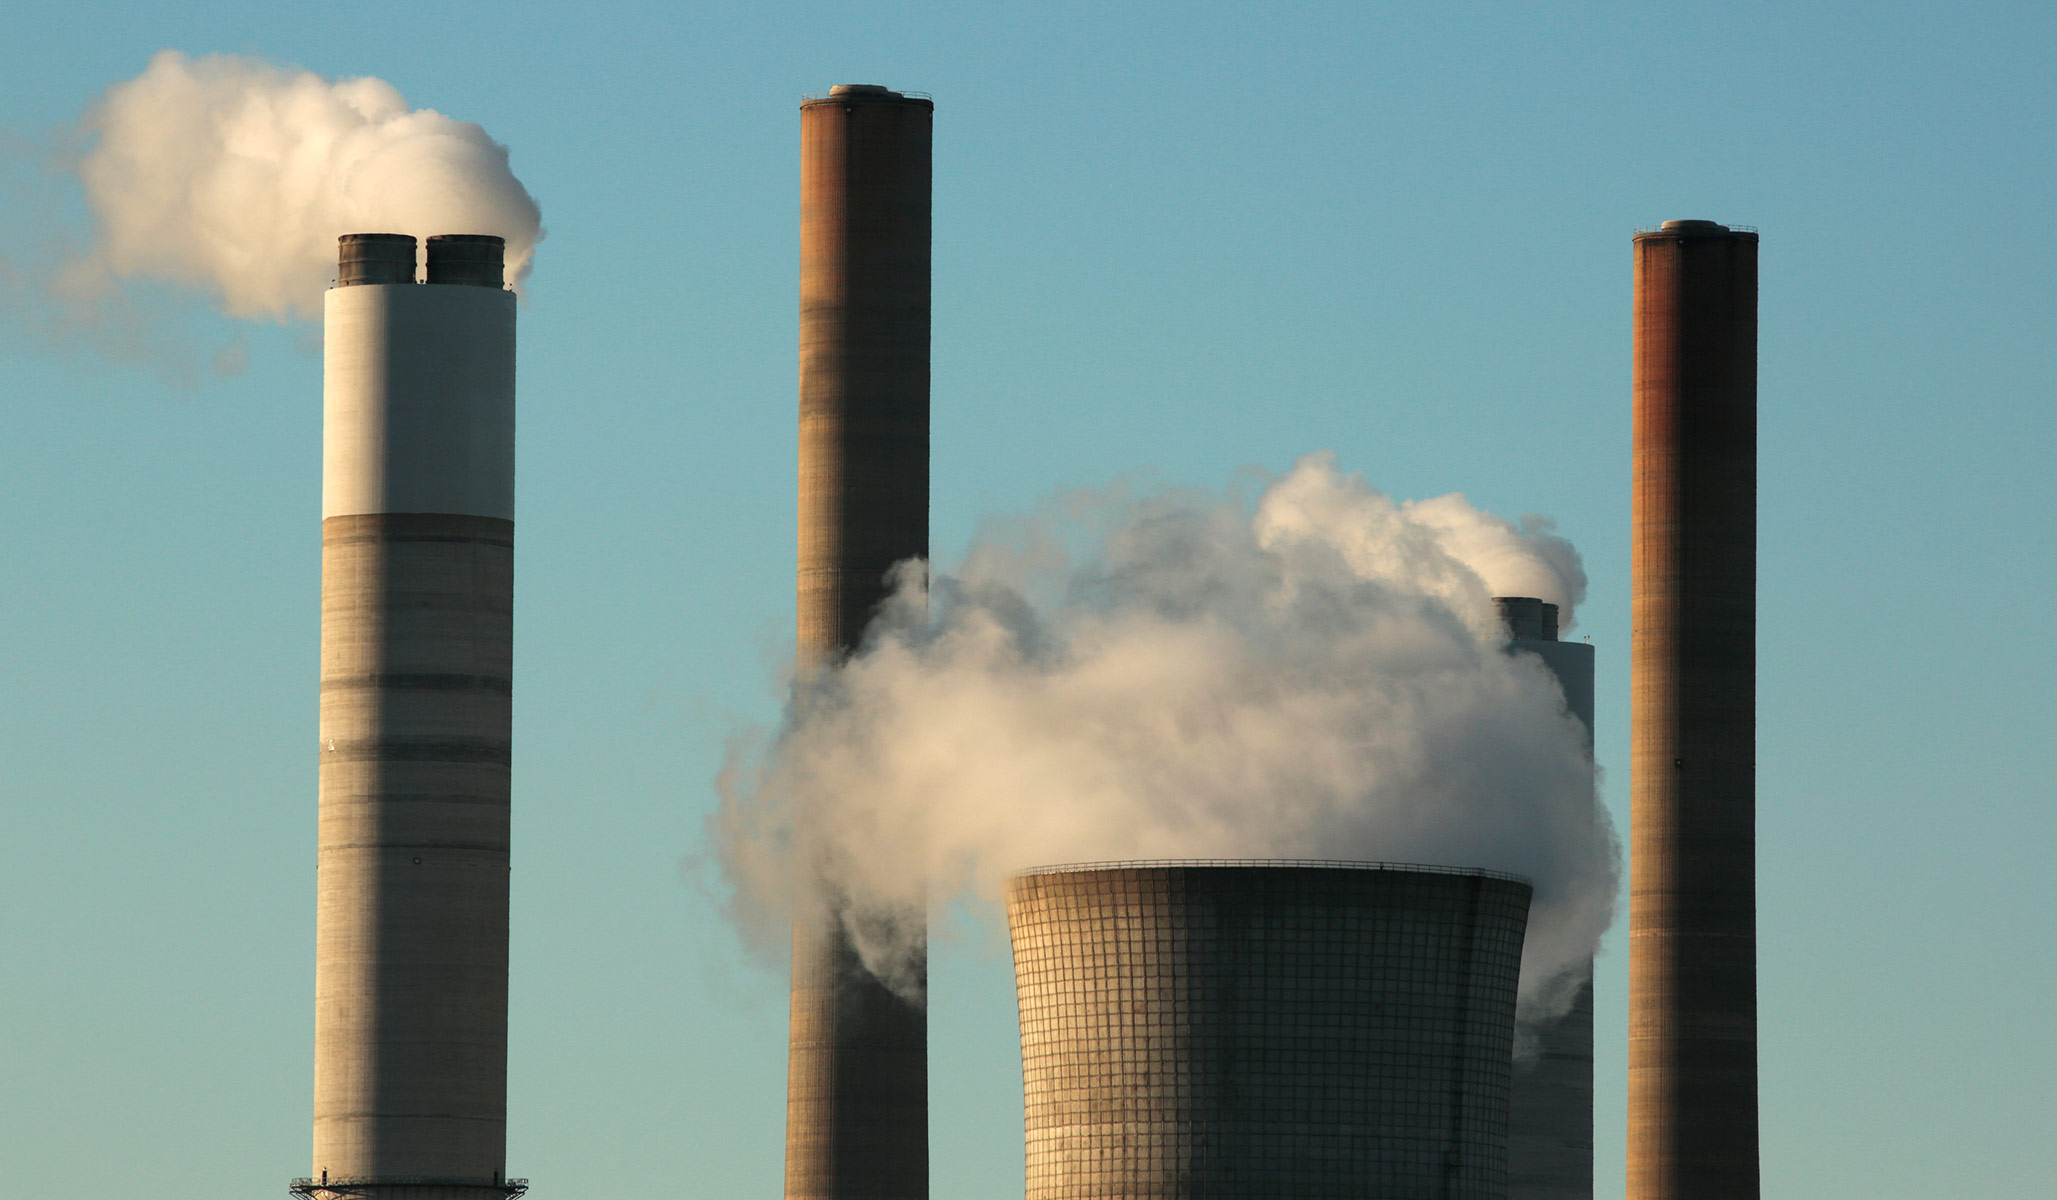 EPA to Propose Strict Carbon Limits for Power Plants